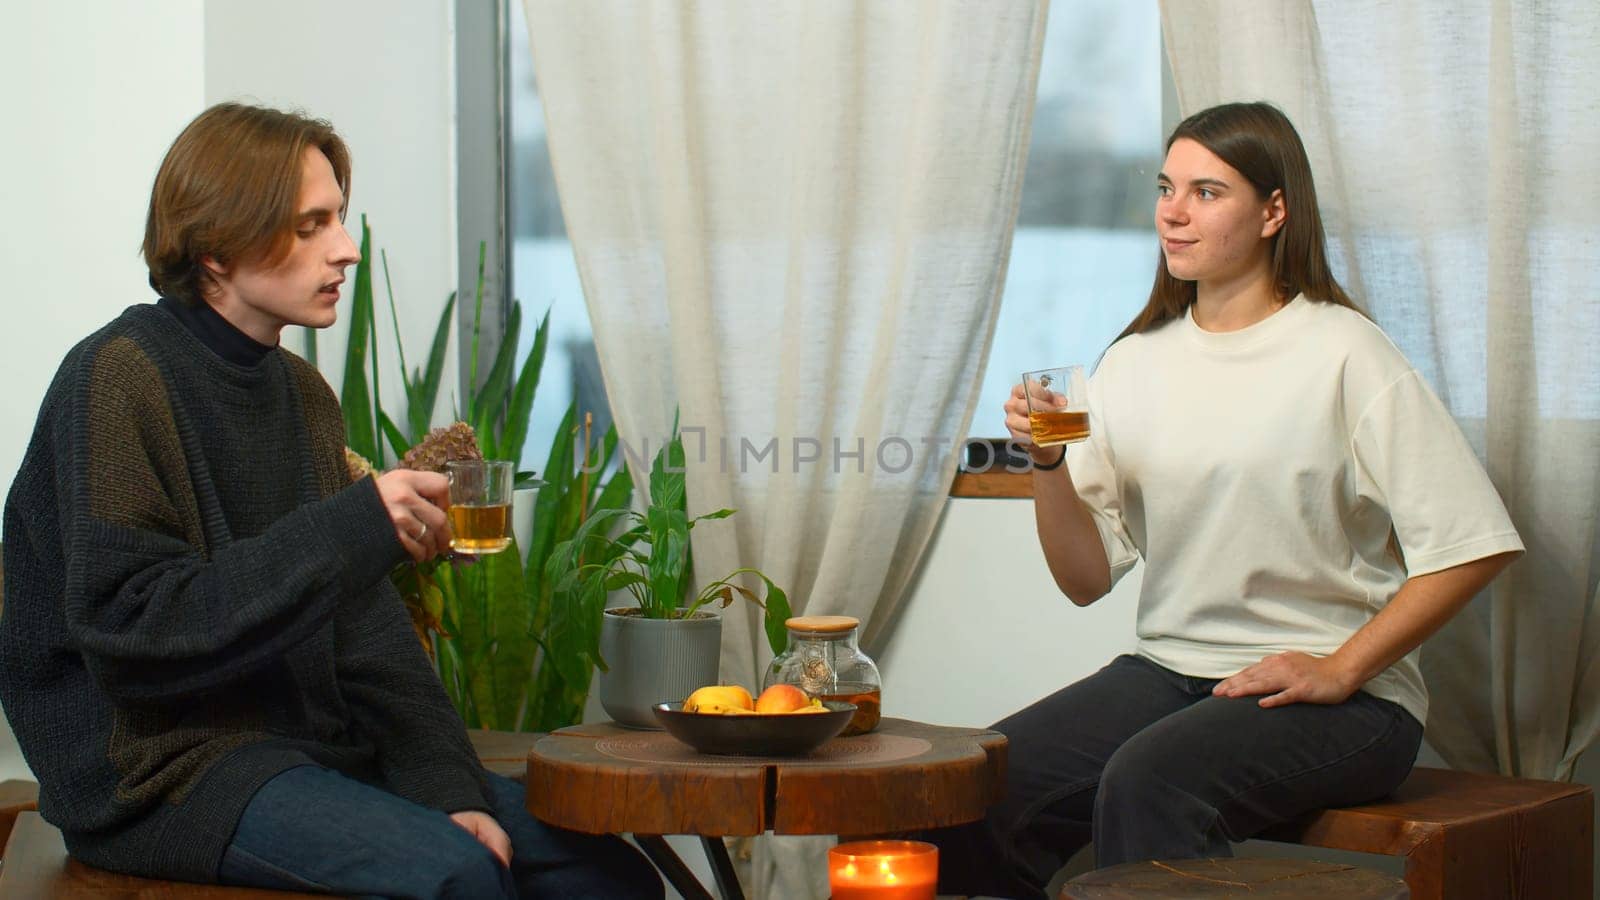 Students communicate and drink tea in cafe. Media. Young man and woman are drinking tea and talking in cafe. Cheerful conversation between young couple of students in cozy cafe by Mediawhalestock